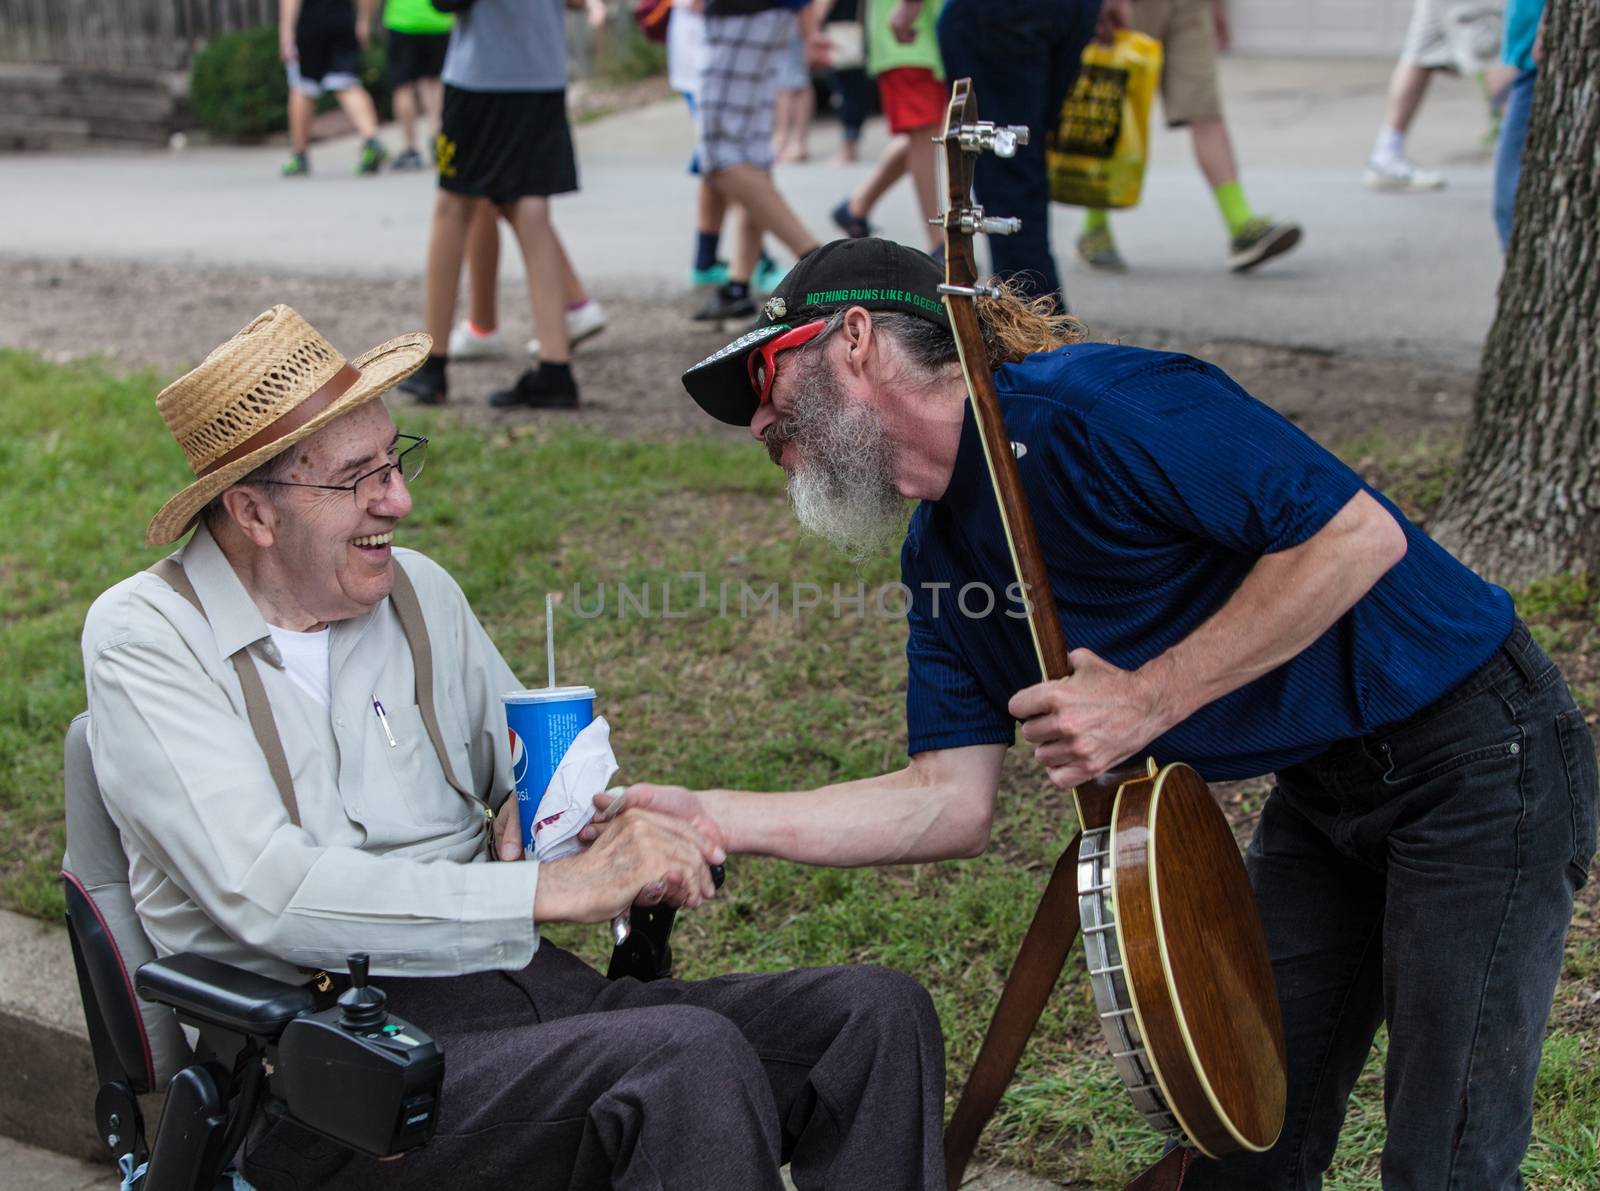 DES MOINES, IA /USA - AUGUST 10: Unidentified banjo player shakes hand at the Iowa State Fair on August 10, 2014 in Des Moines, Iowa, USA.